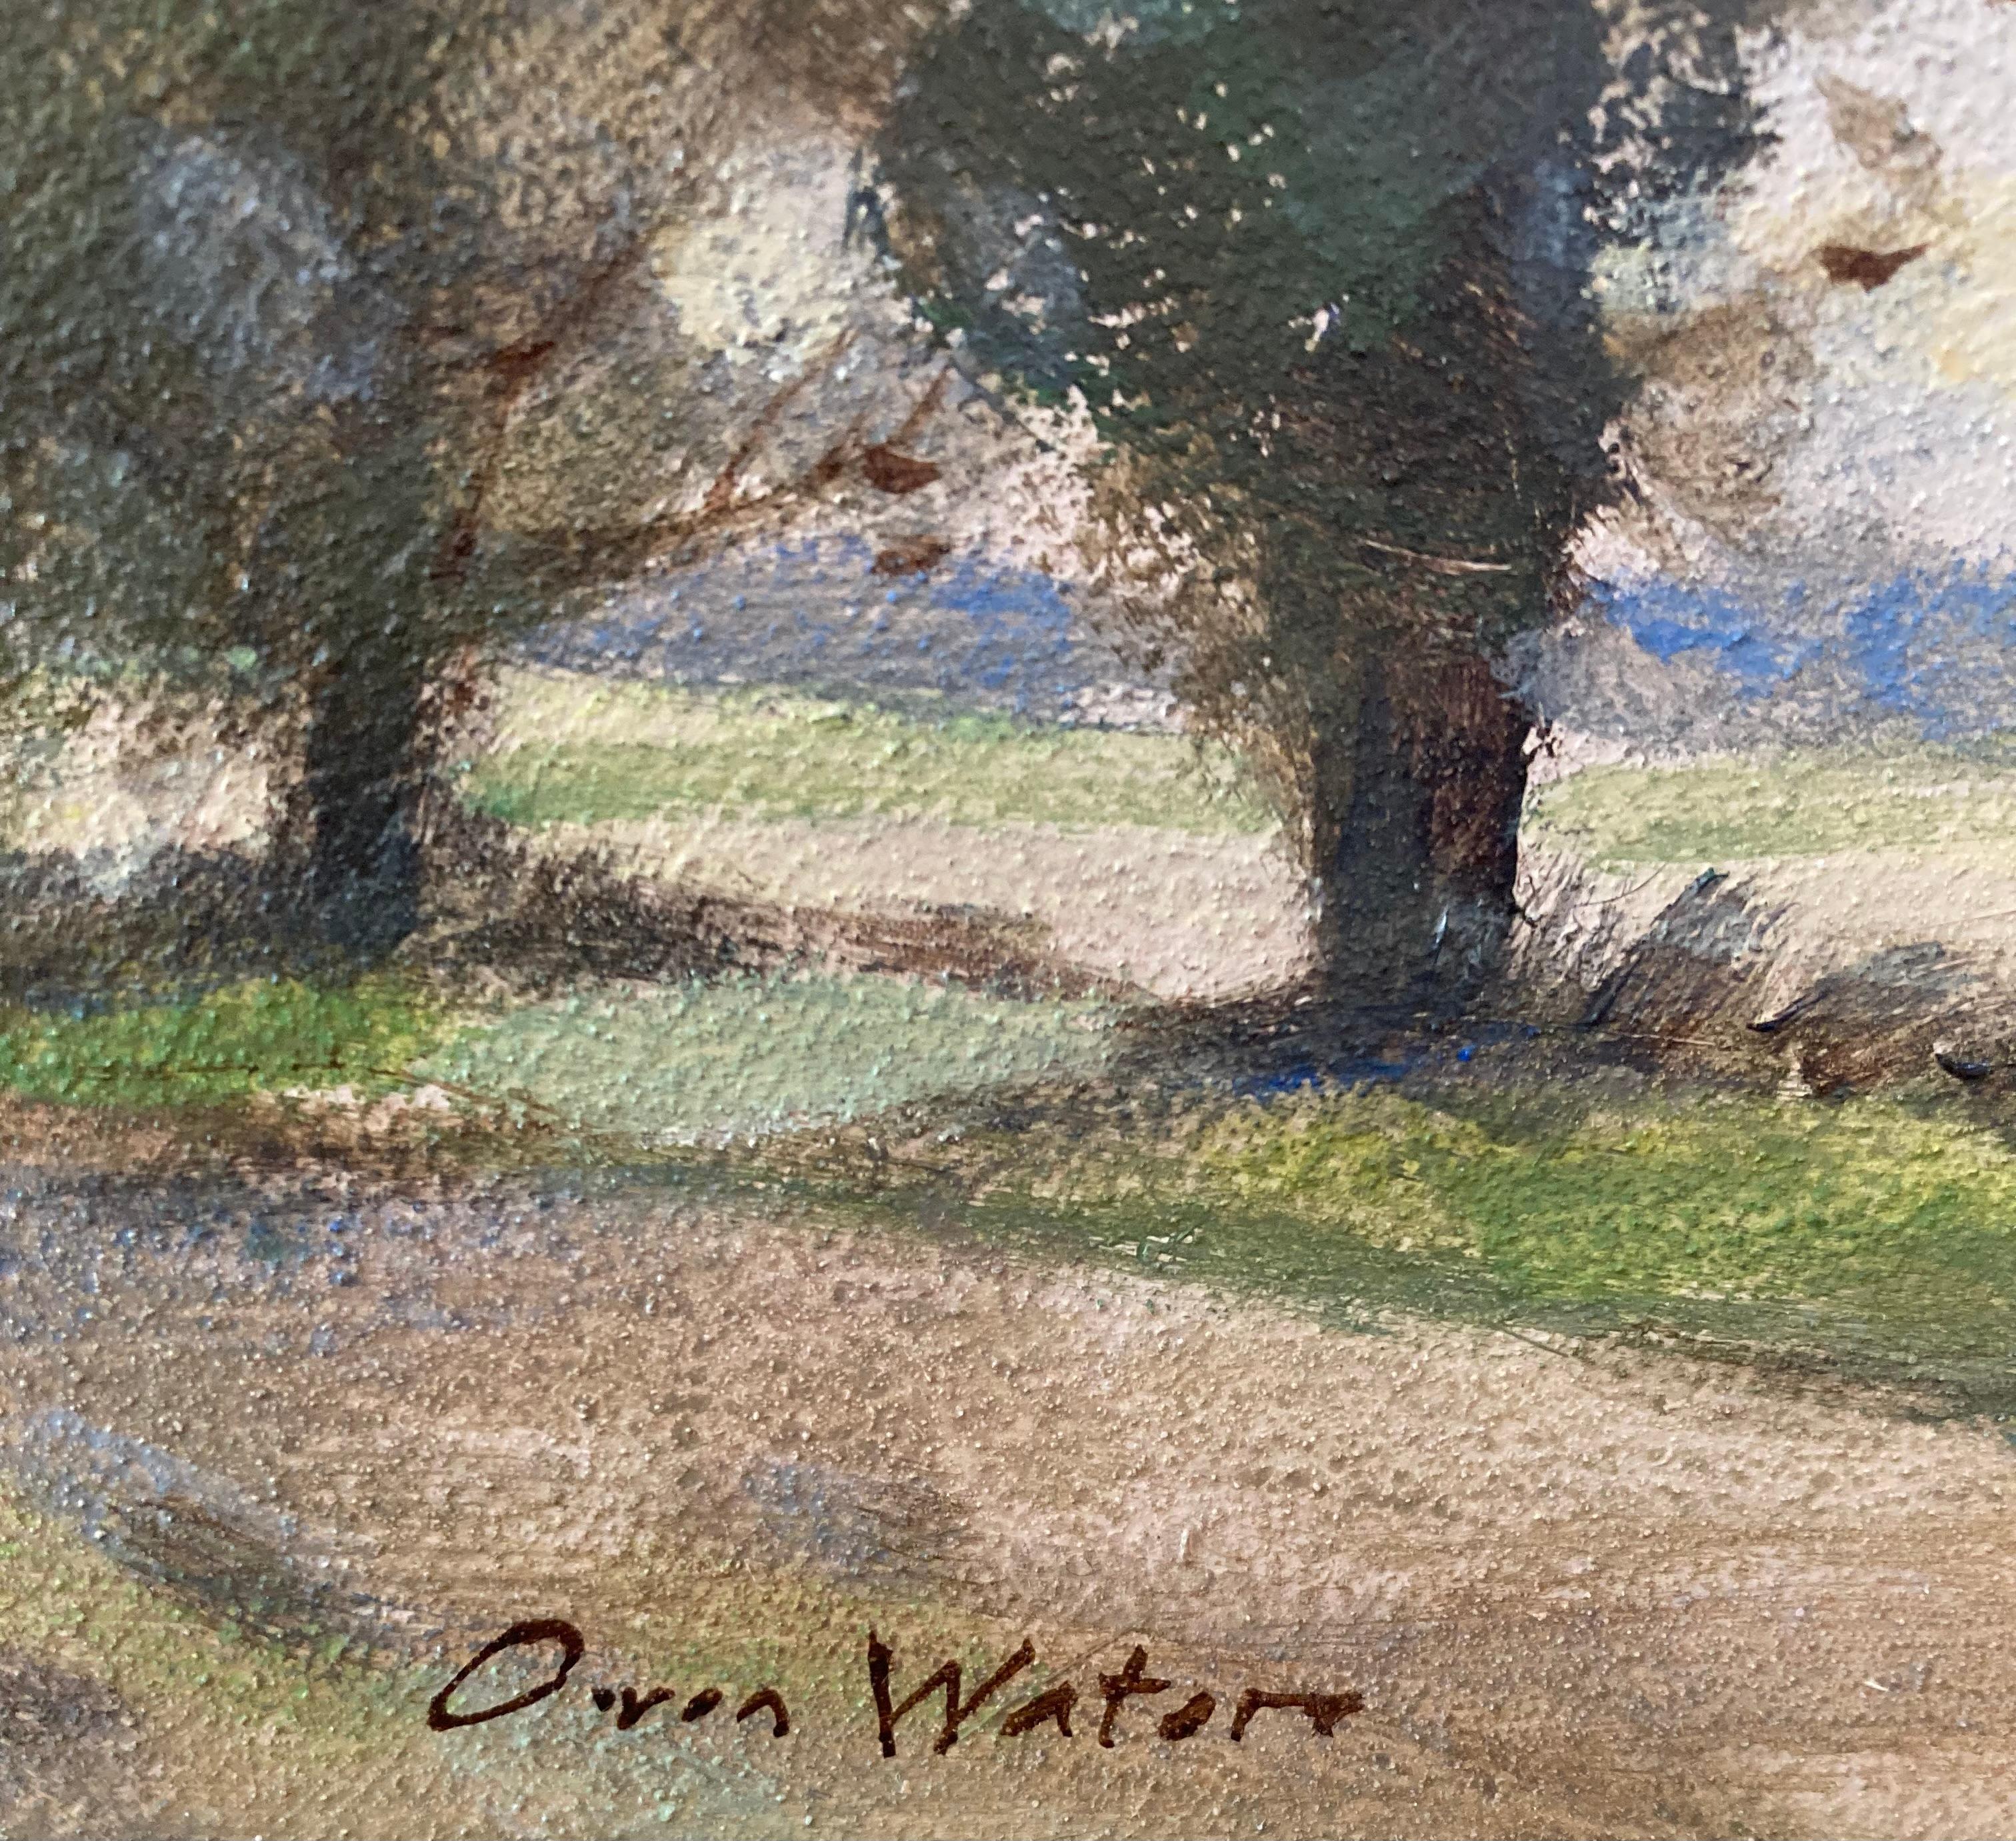 A wonderful example of the artist's work depicting an idyllic scene in the Norfolk countryside.

Owen Waters (1916-2004)
Norfolk pastures
Signed, inscribed to the reverse
Oil on board
9 x 12 inches excluding frame
12  x 15 with frame

Owen Waters